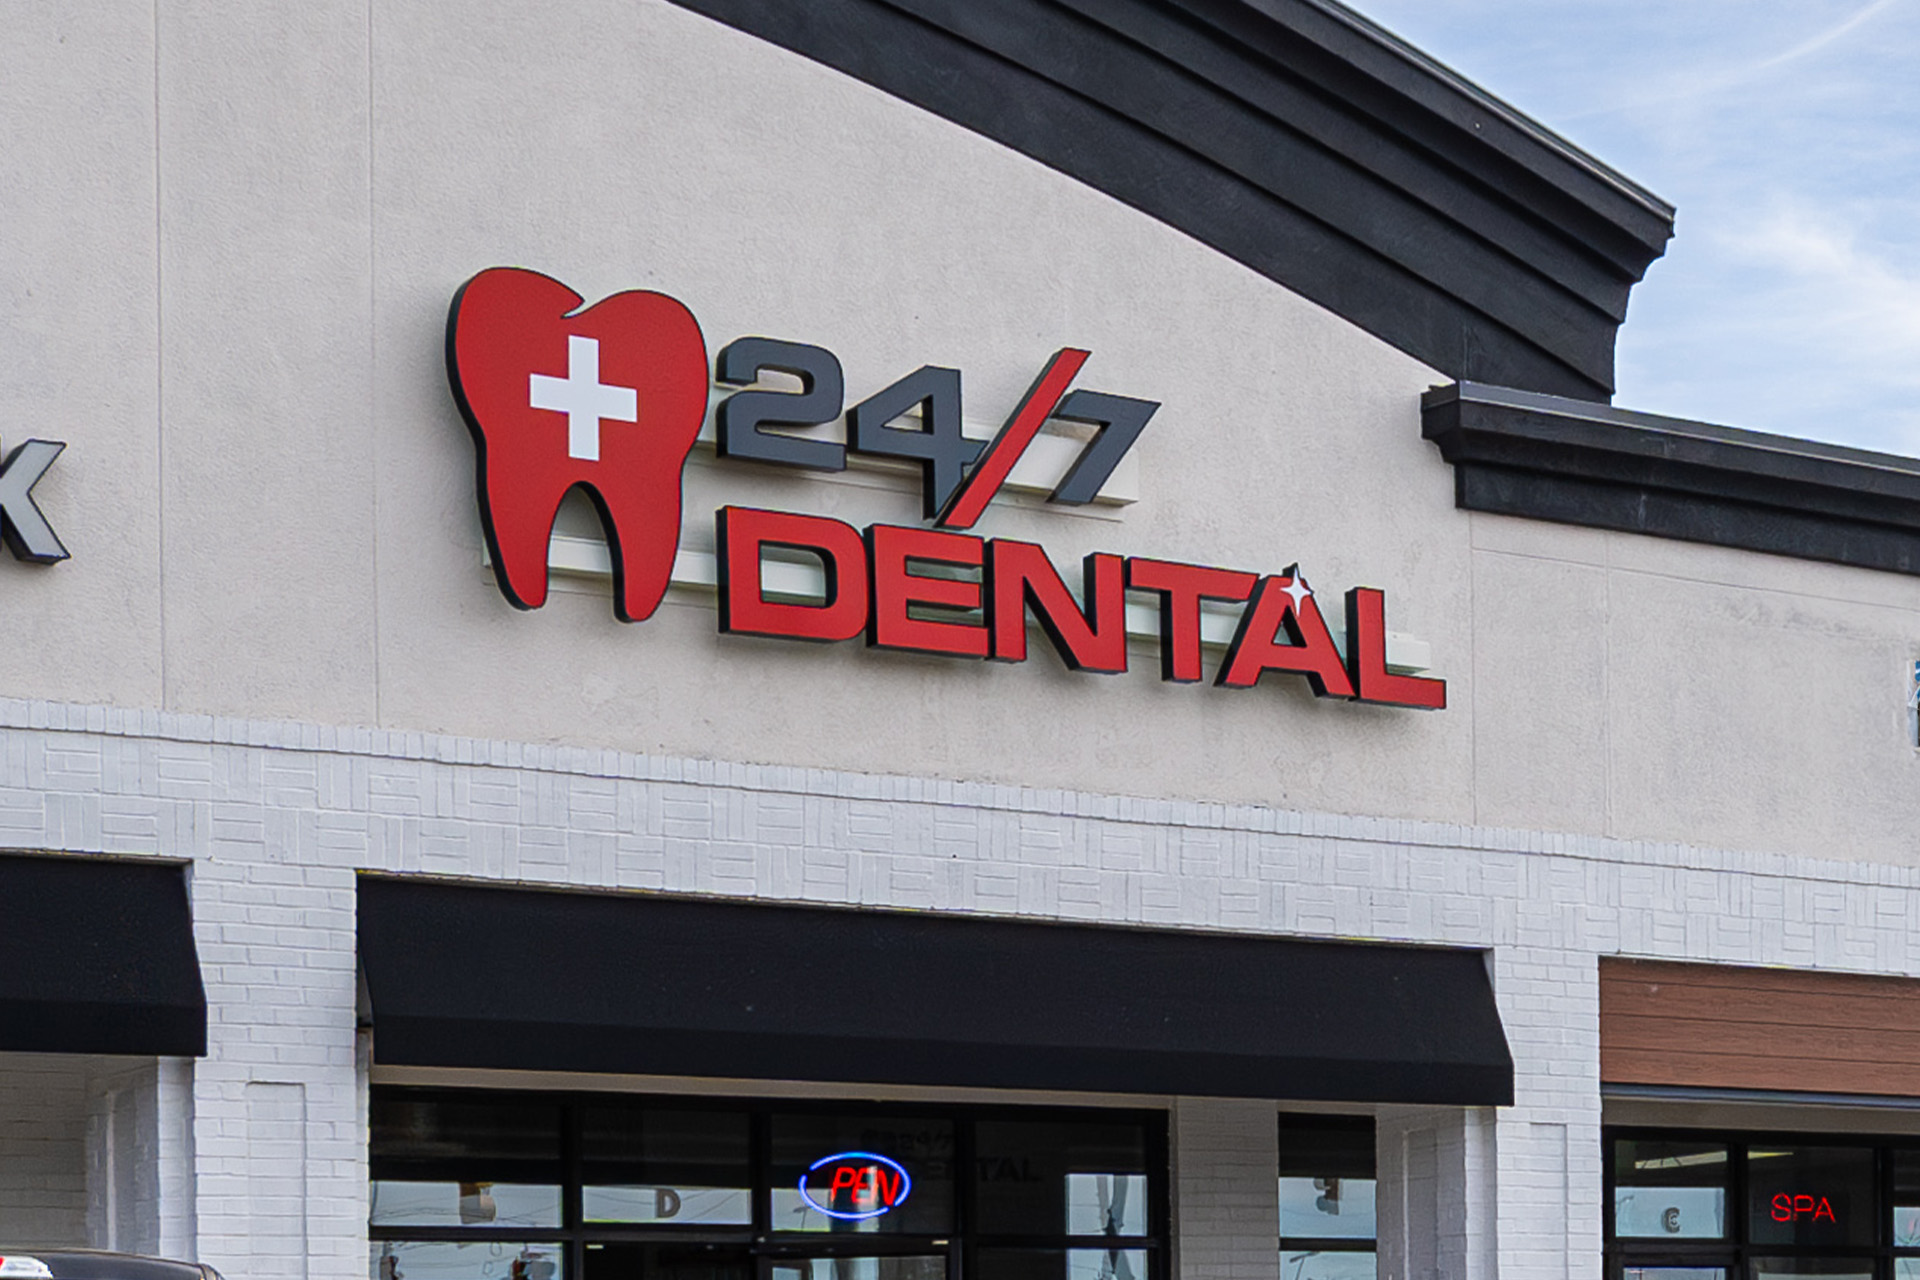 24 7 Dental | Dentures, Crowns  amp  Caps and Oral Exams